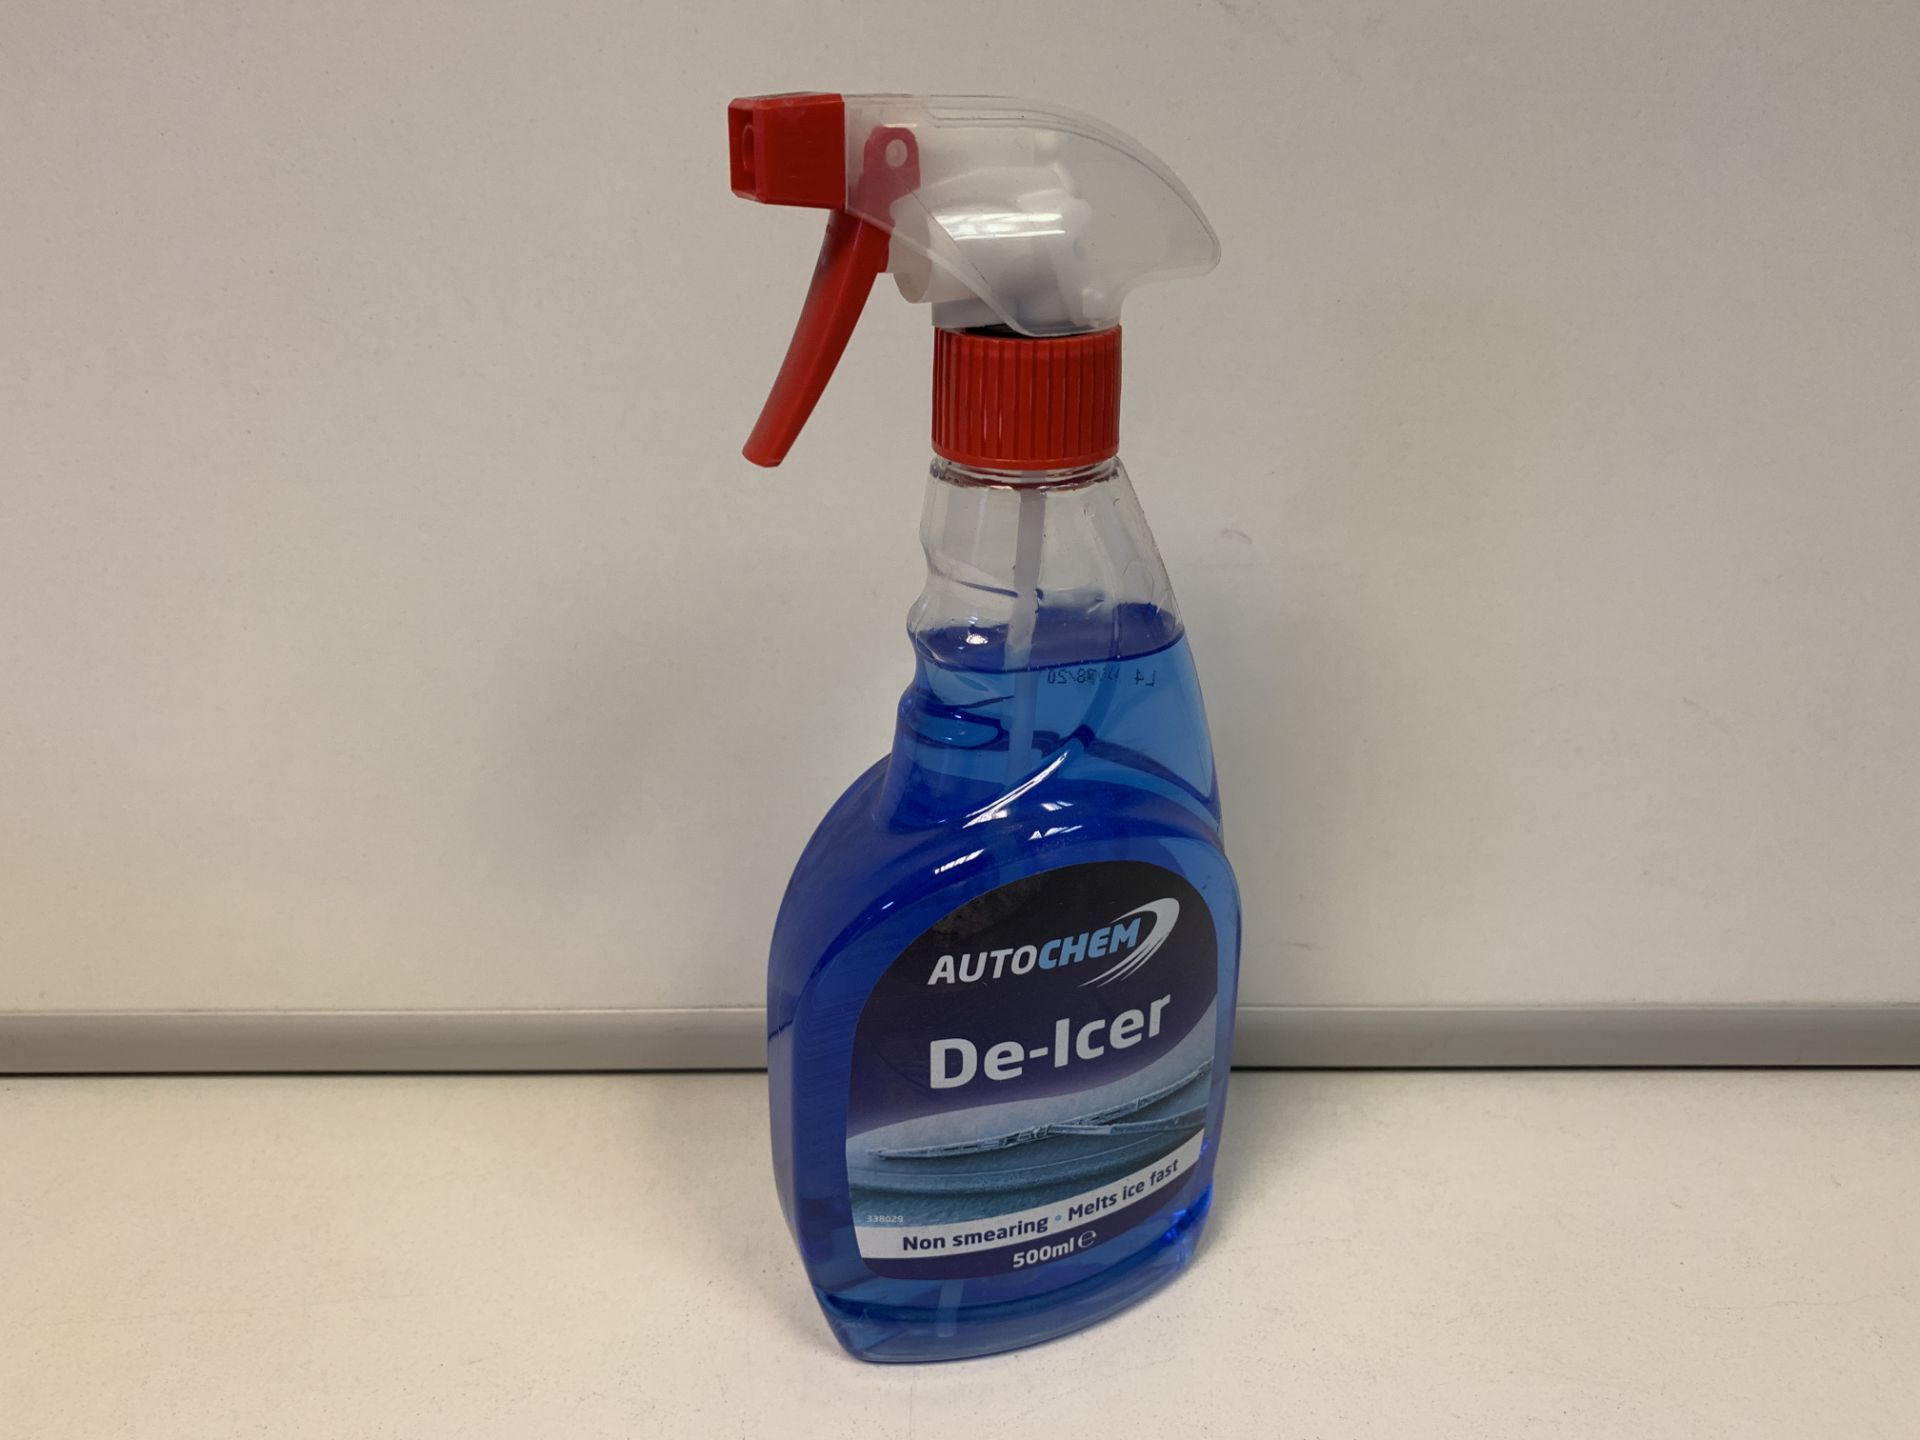 60 X NEW 500ML SPRAY BOTTLES OF AUTOCHEM DE-ICER. NON SMEARING. MELTS ICE FAST.